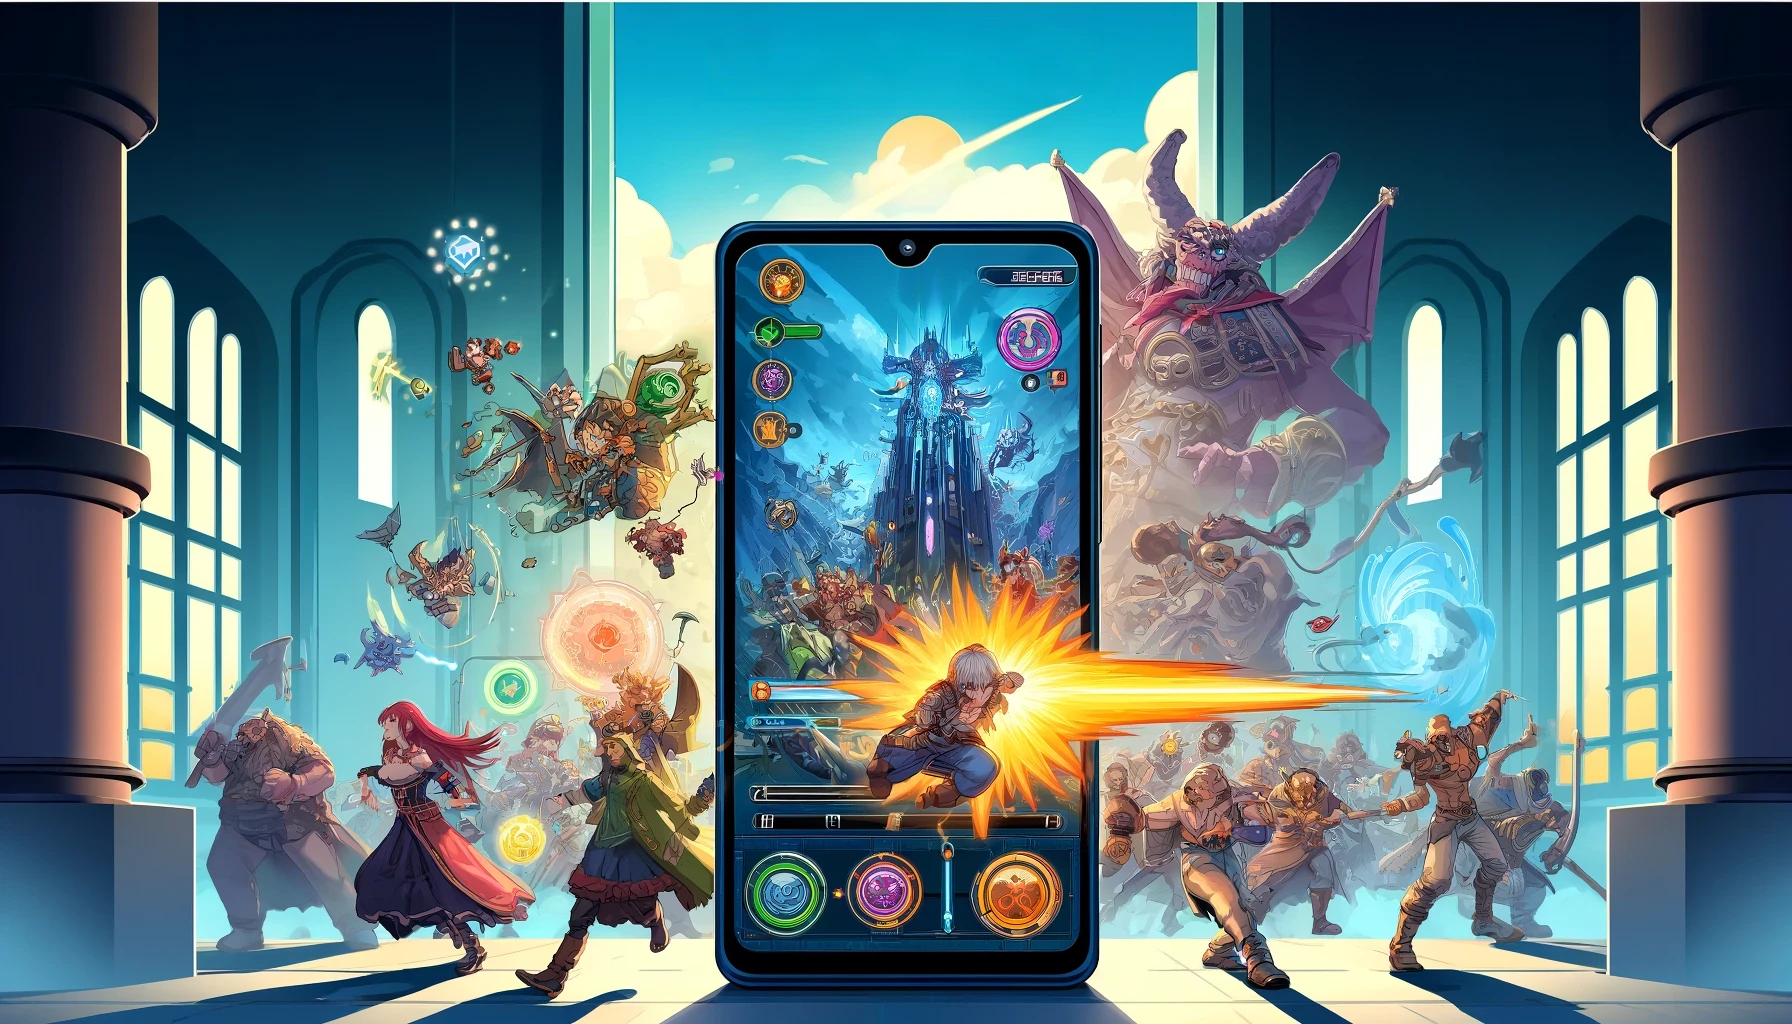 Tencent hits new success with ‘Dungeon and Fighter’ mobile game